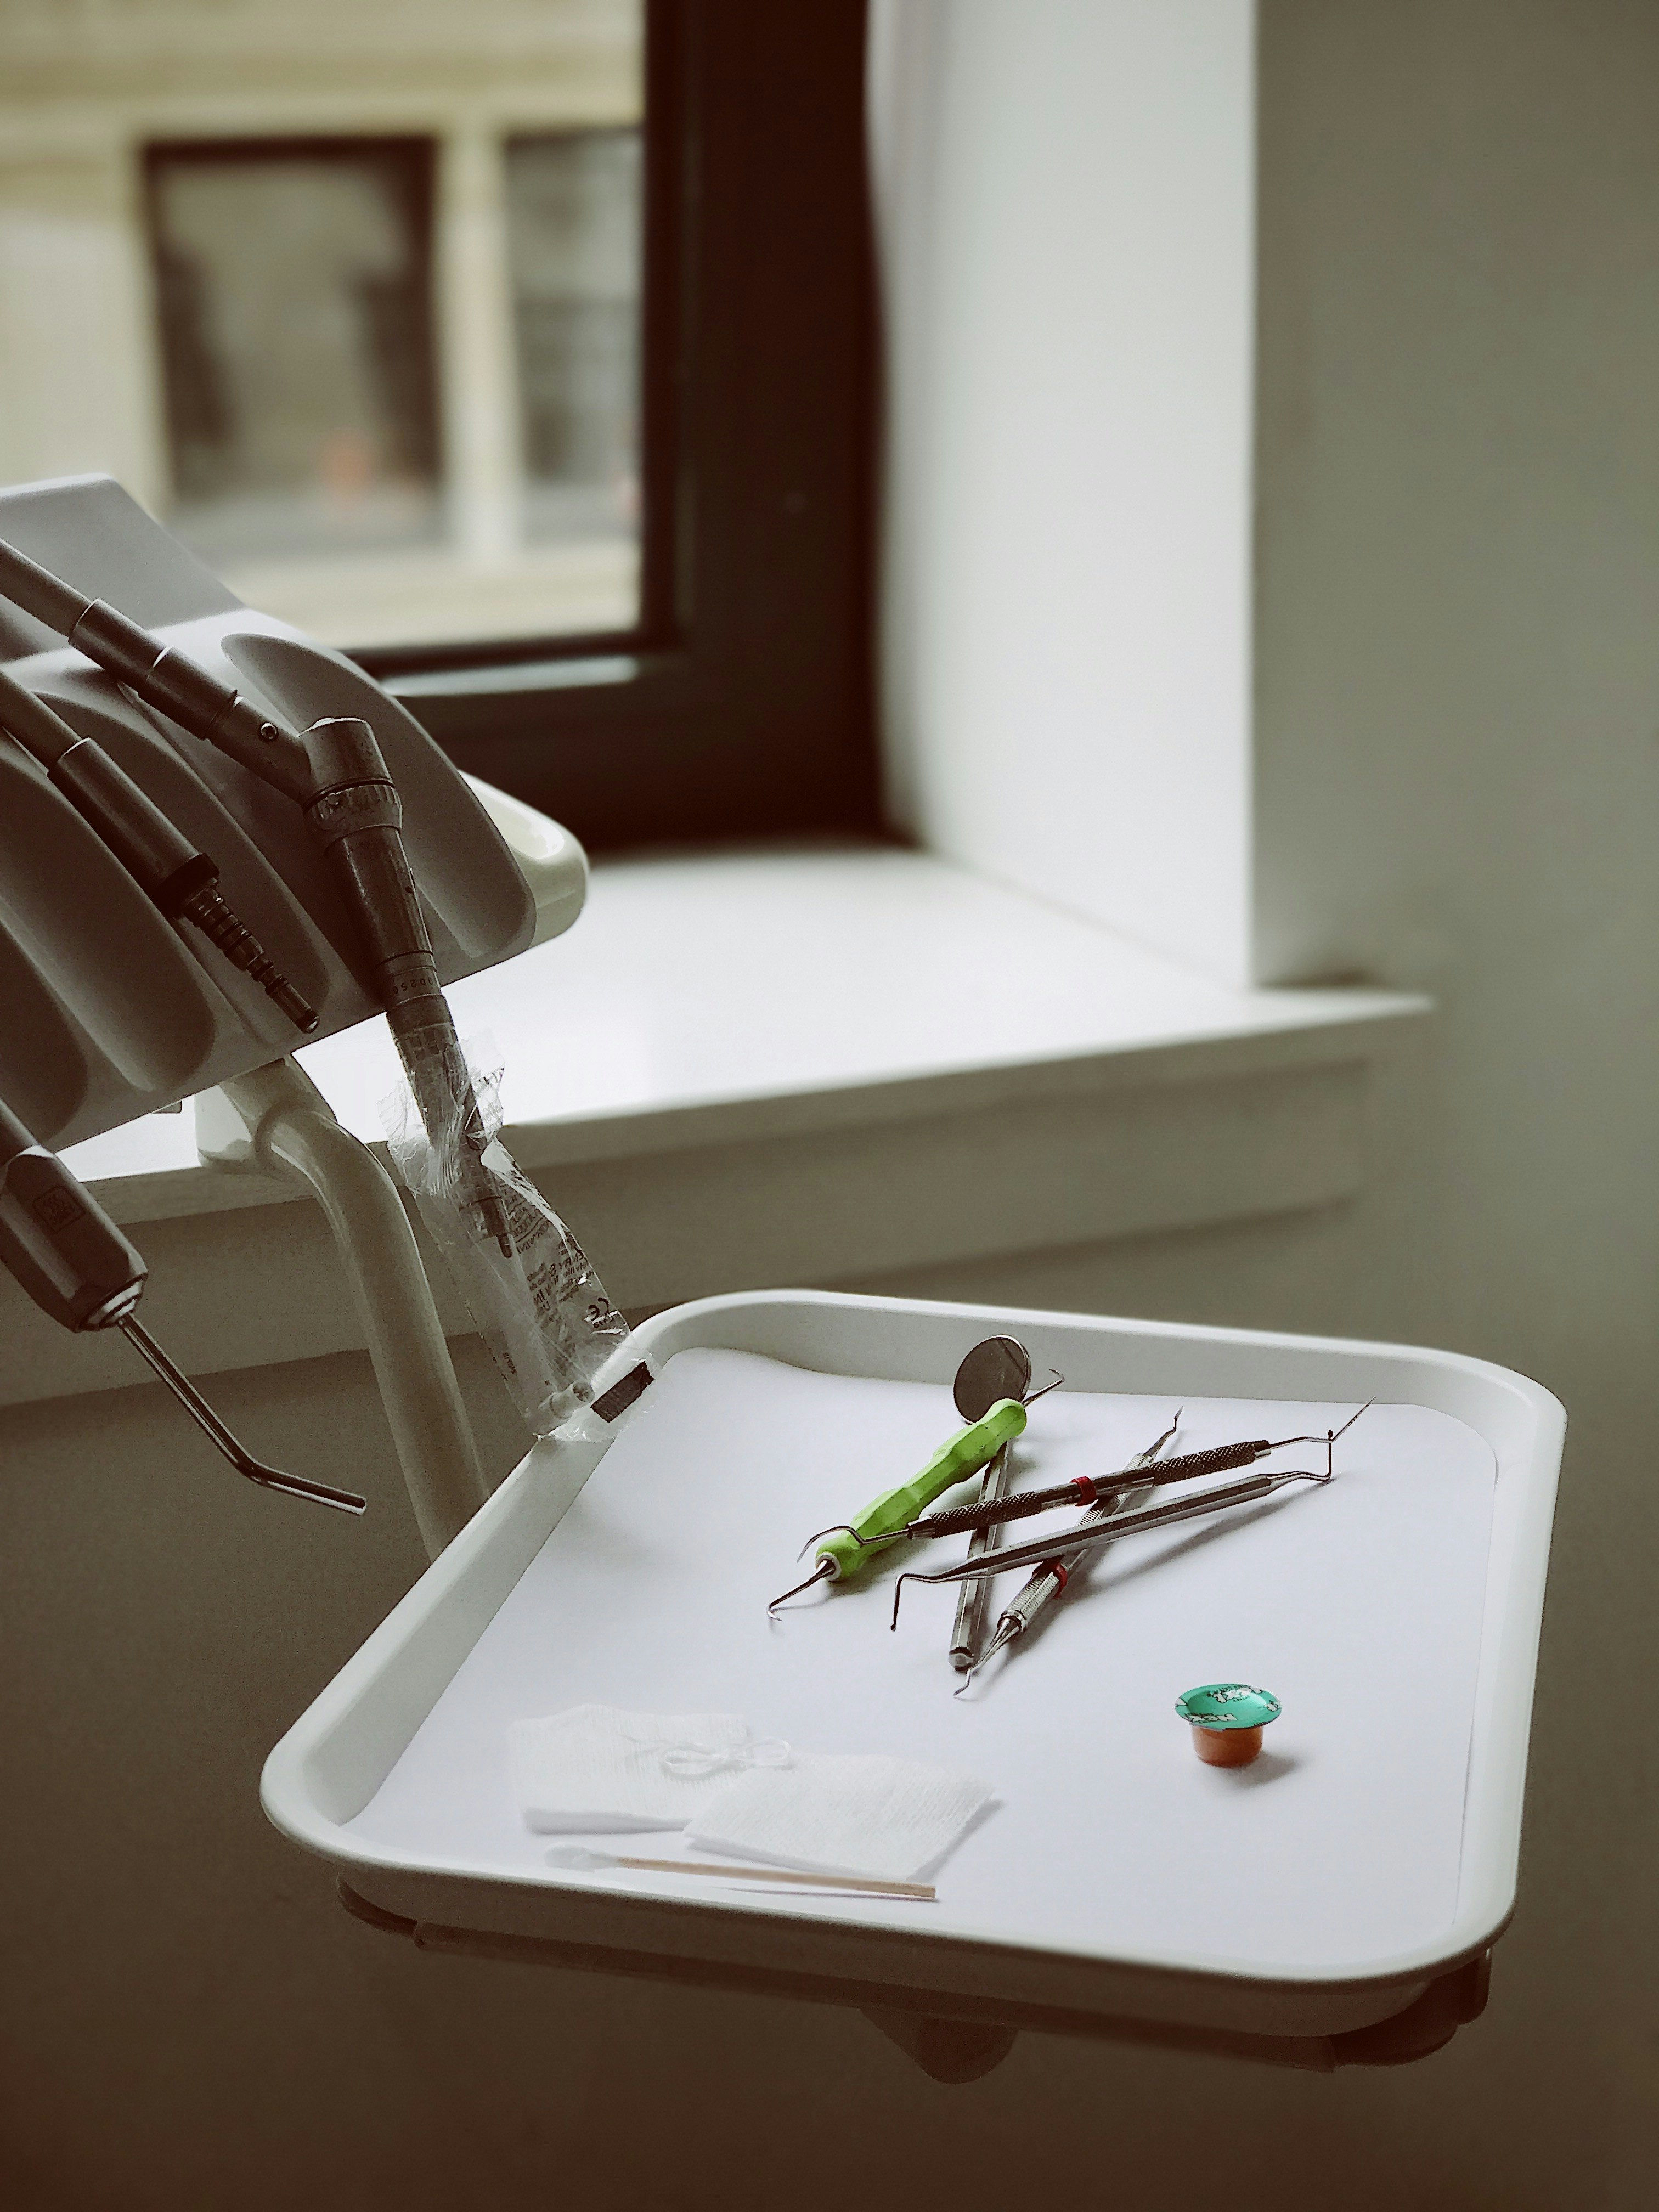 dentist tools and window